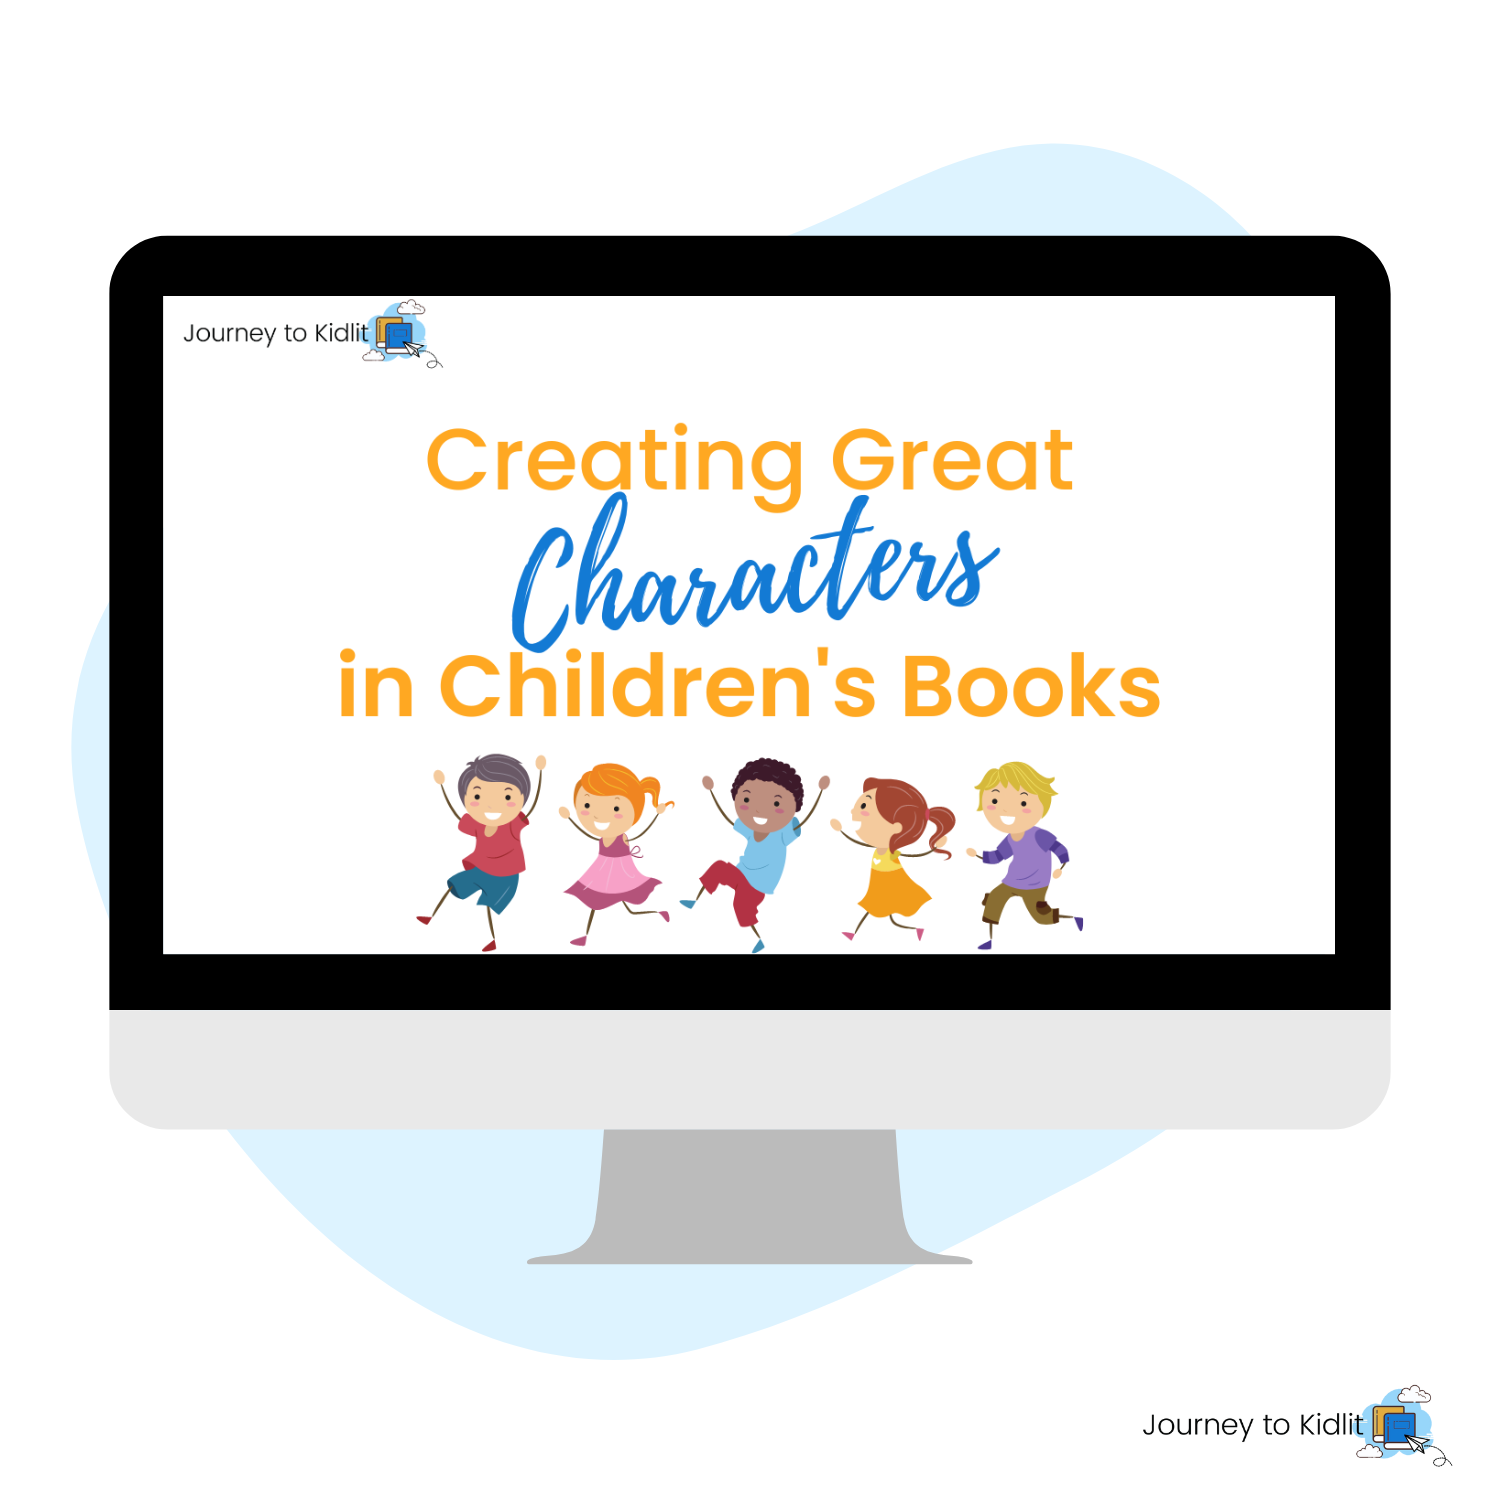 How to create characters in children's books